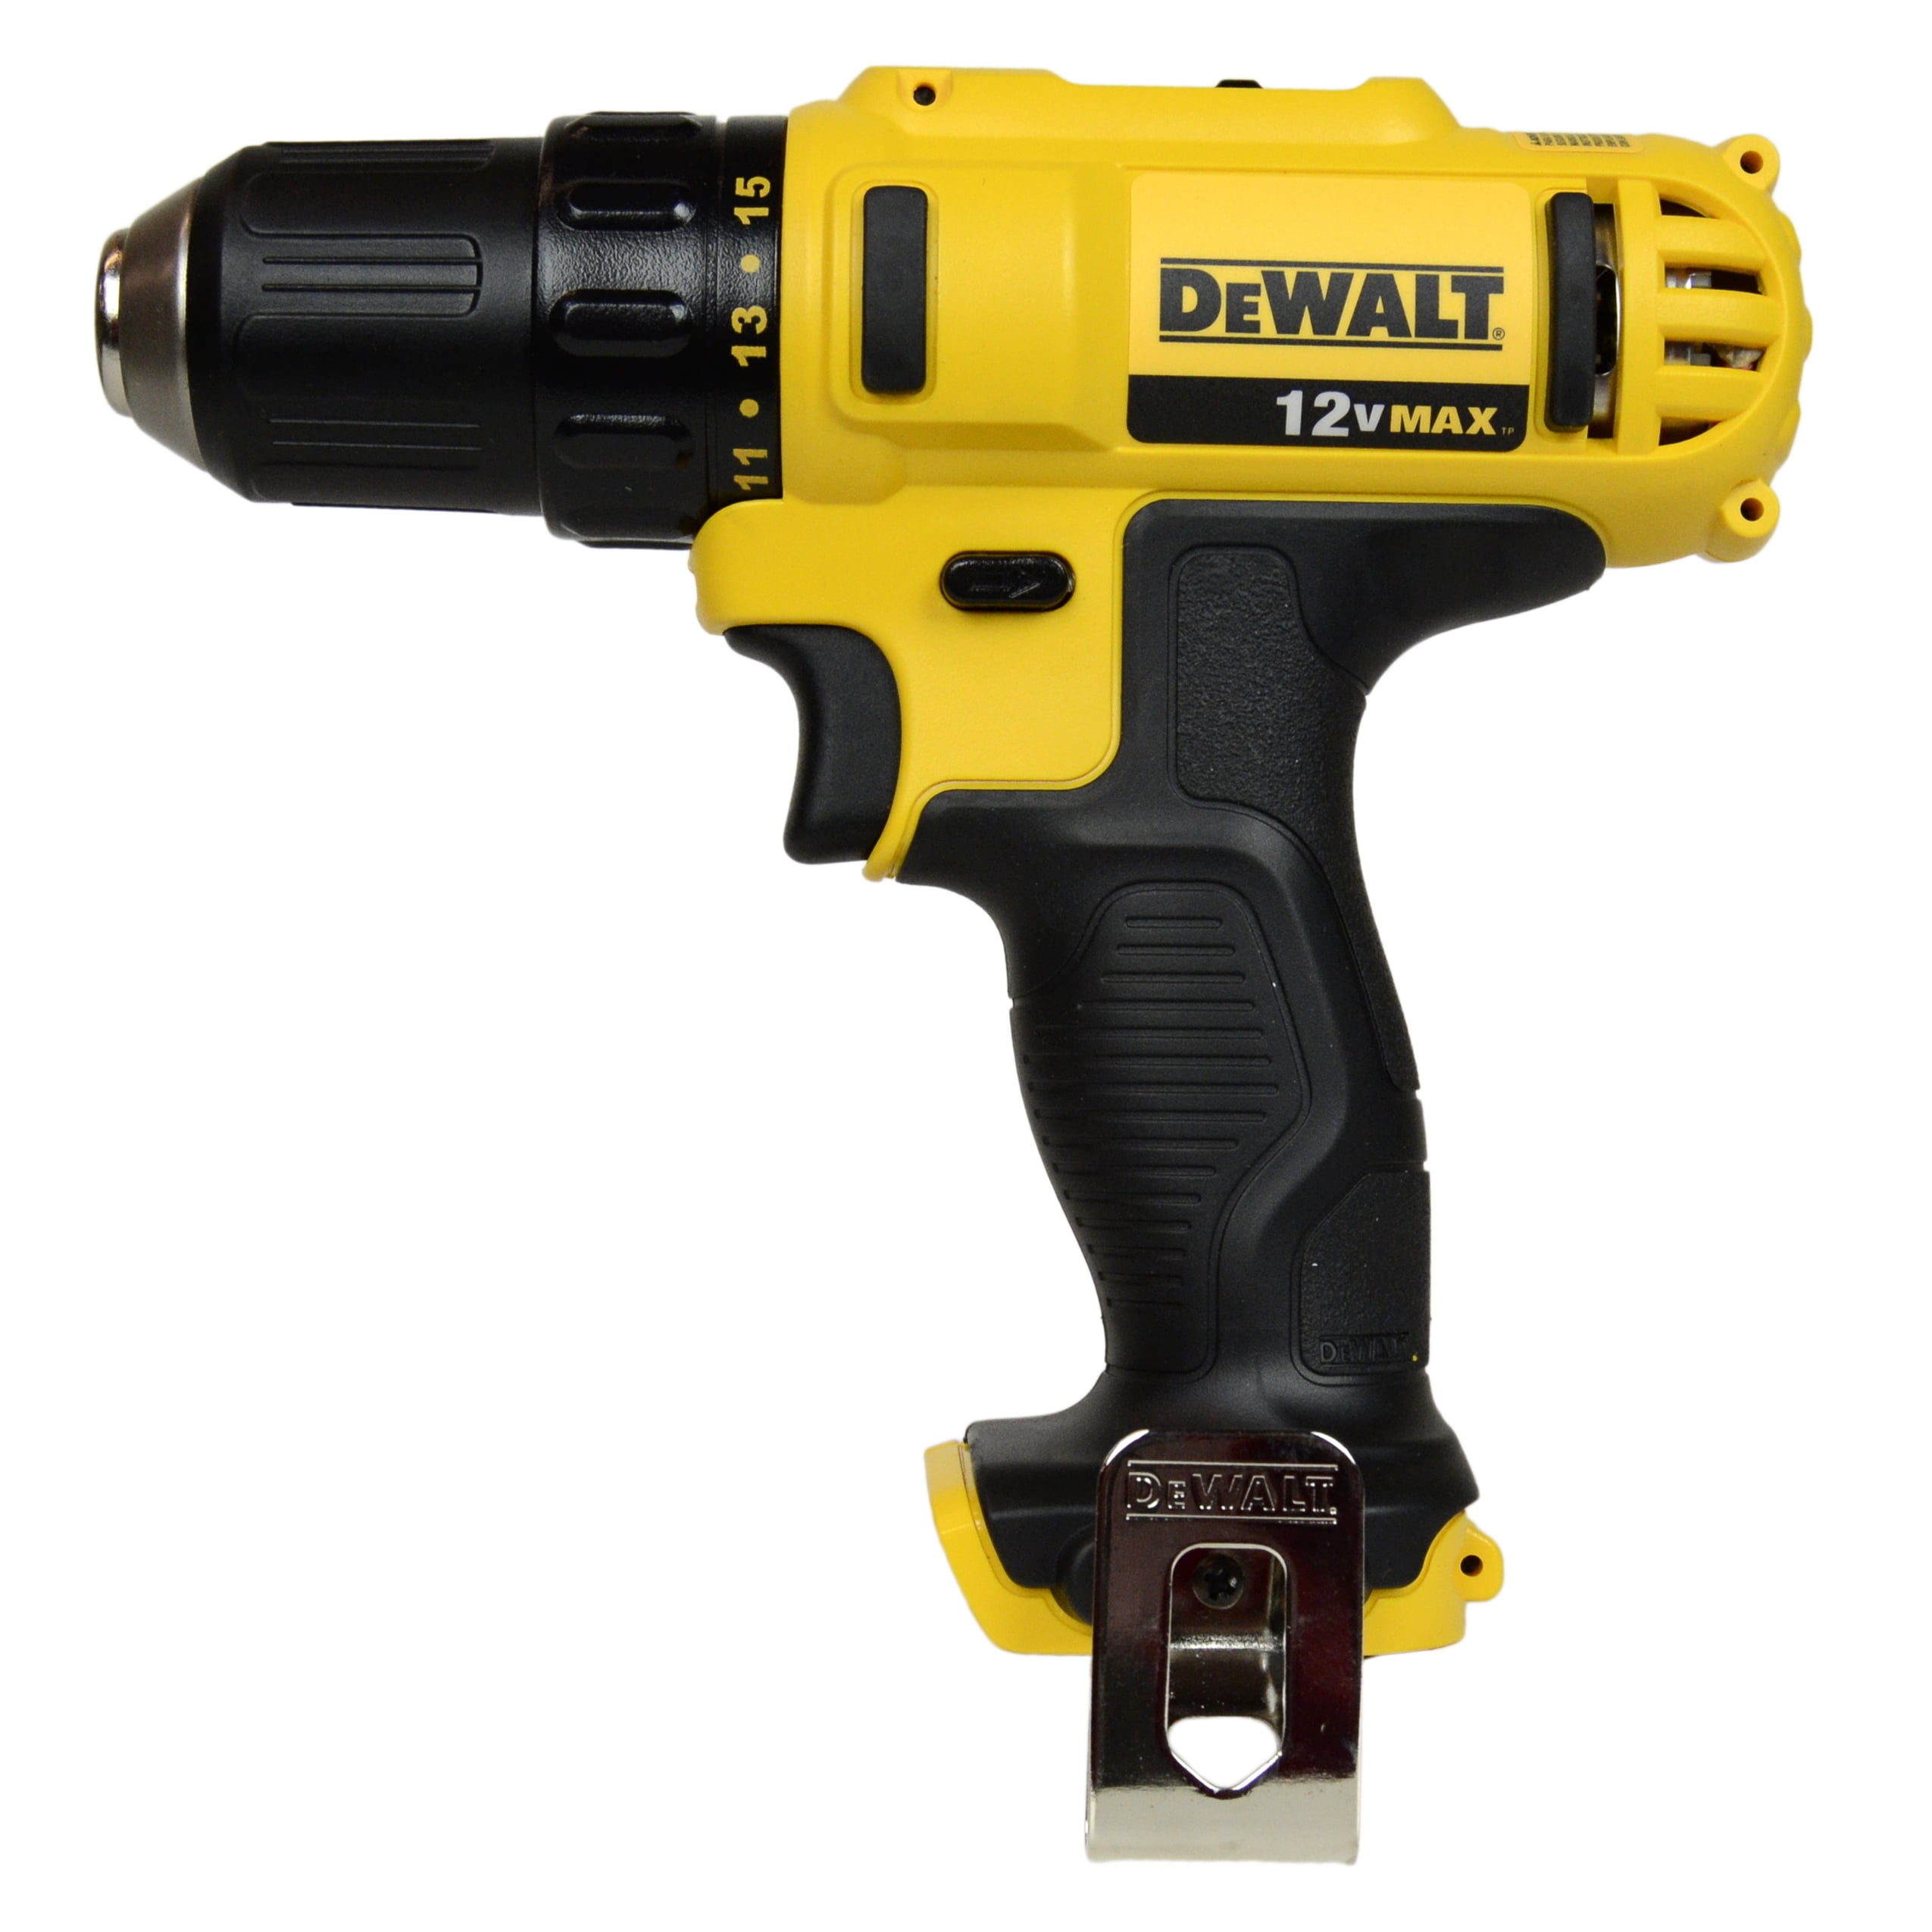  DCD710 12V Max 3/8-in Cordless Lithium-Ion Drill Driver – Tool .